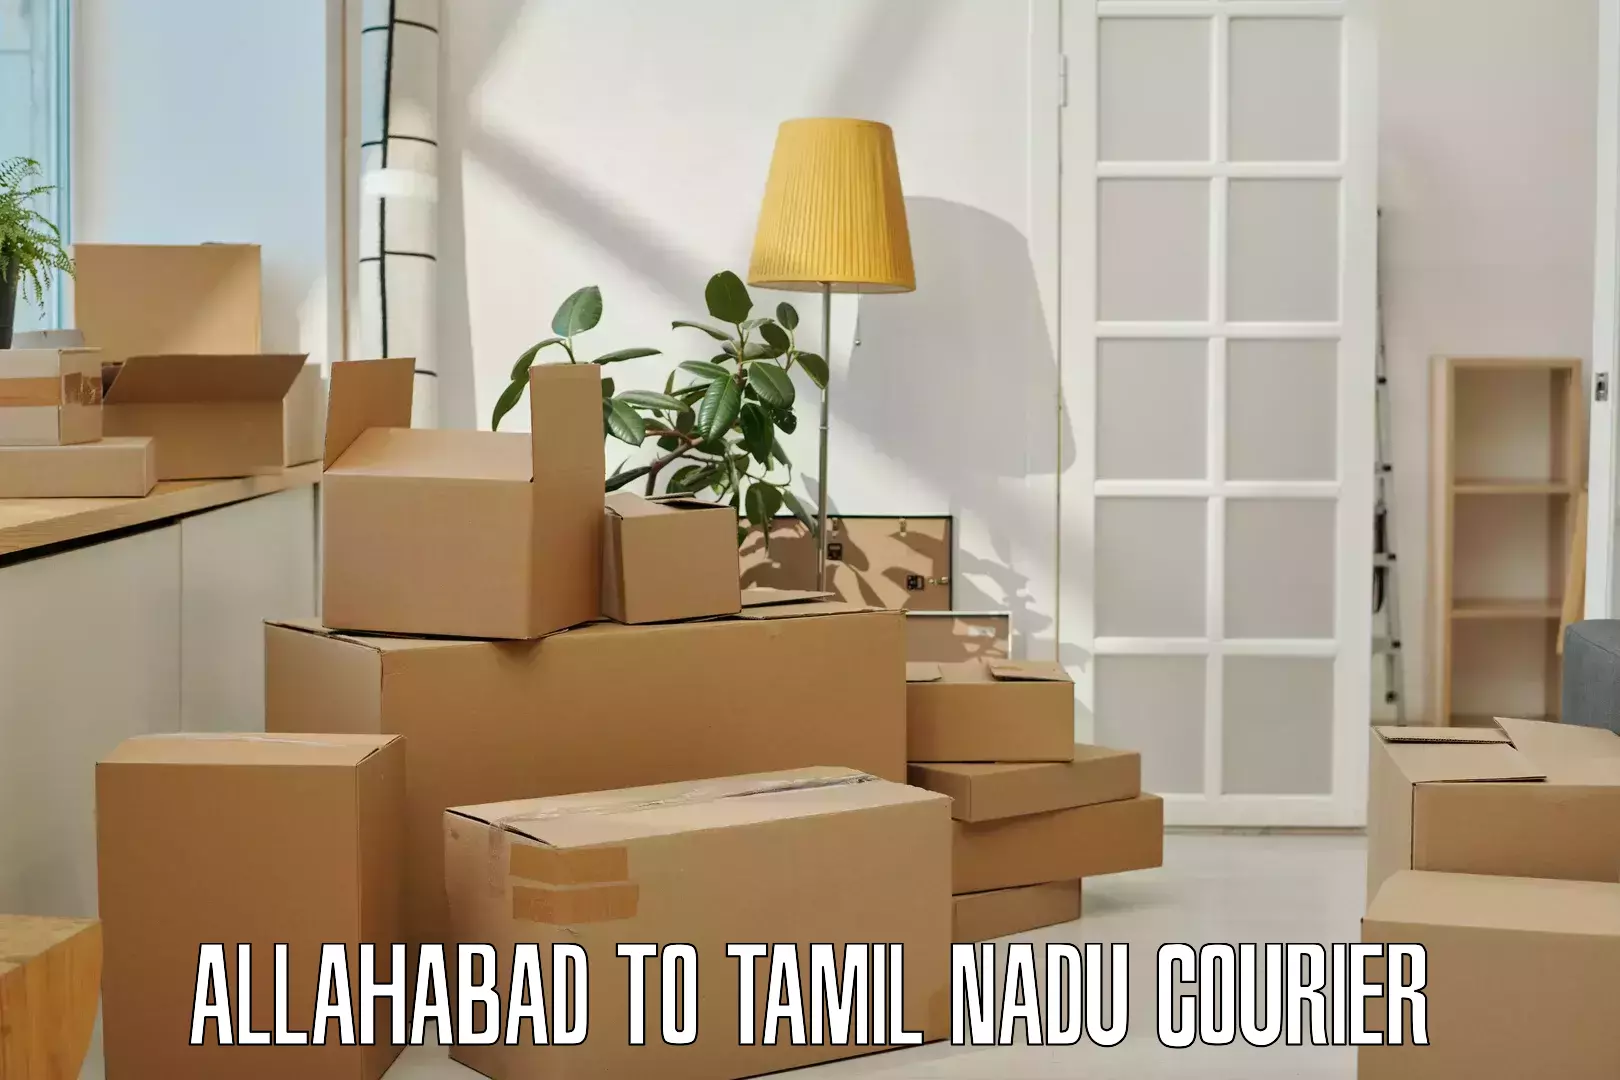 User-friendly delivery service Allahabad to Tamil Nadu